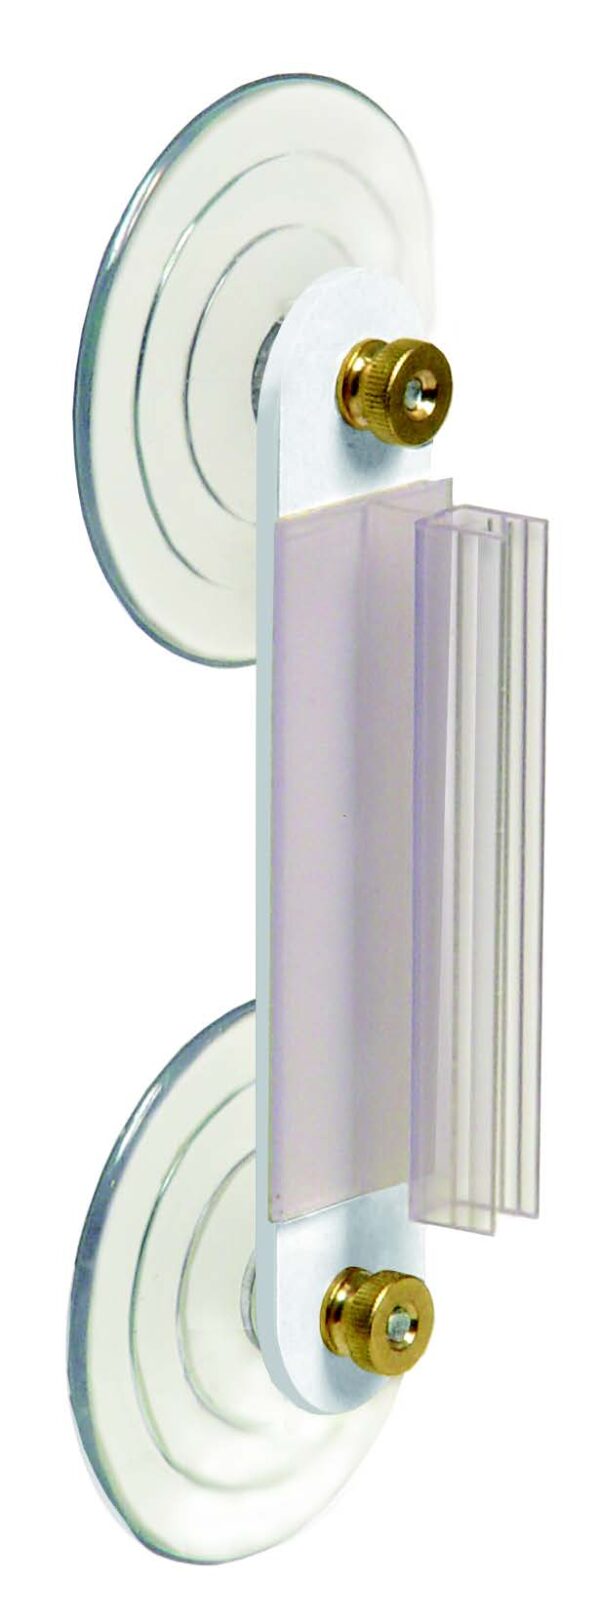 Glass Door Suction Sign Holders PS GB5 | TM Shea Products | Retail Merchandising Display Solutions